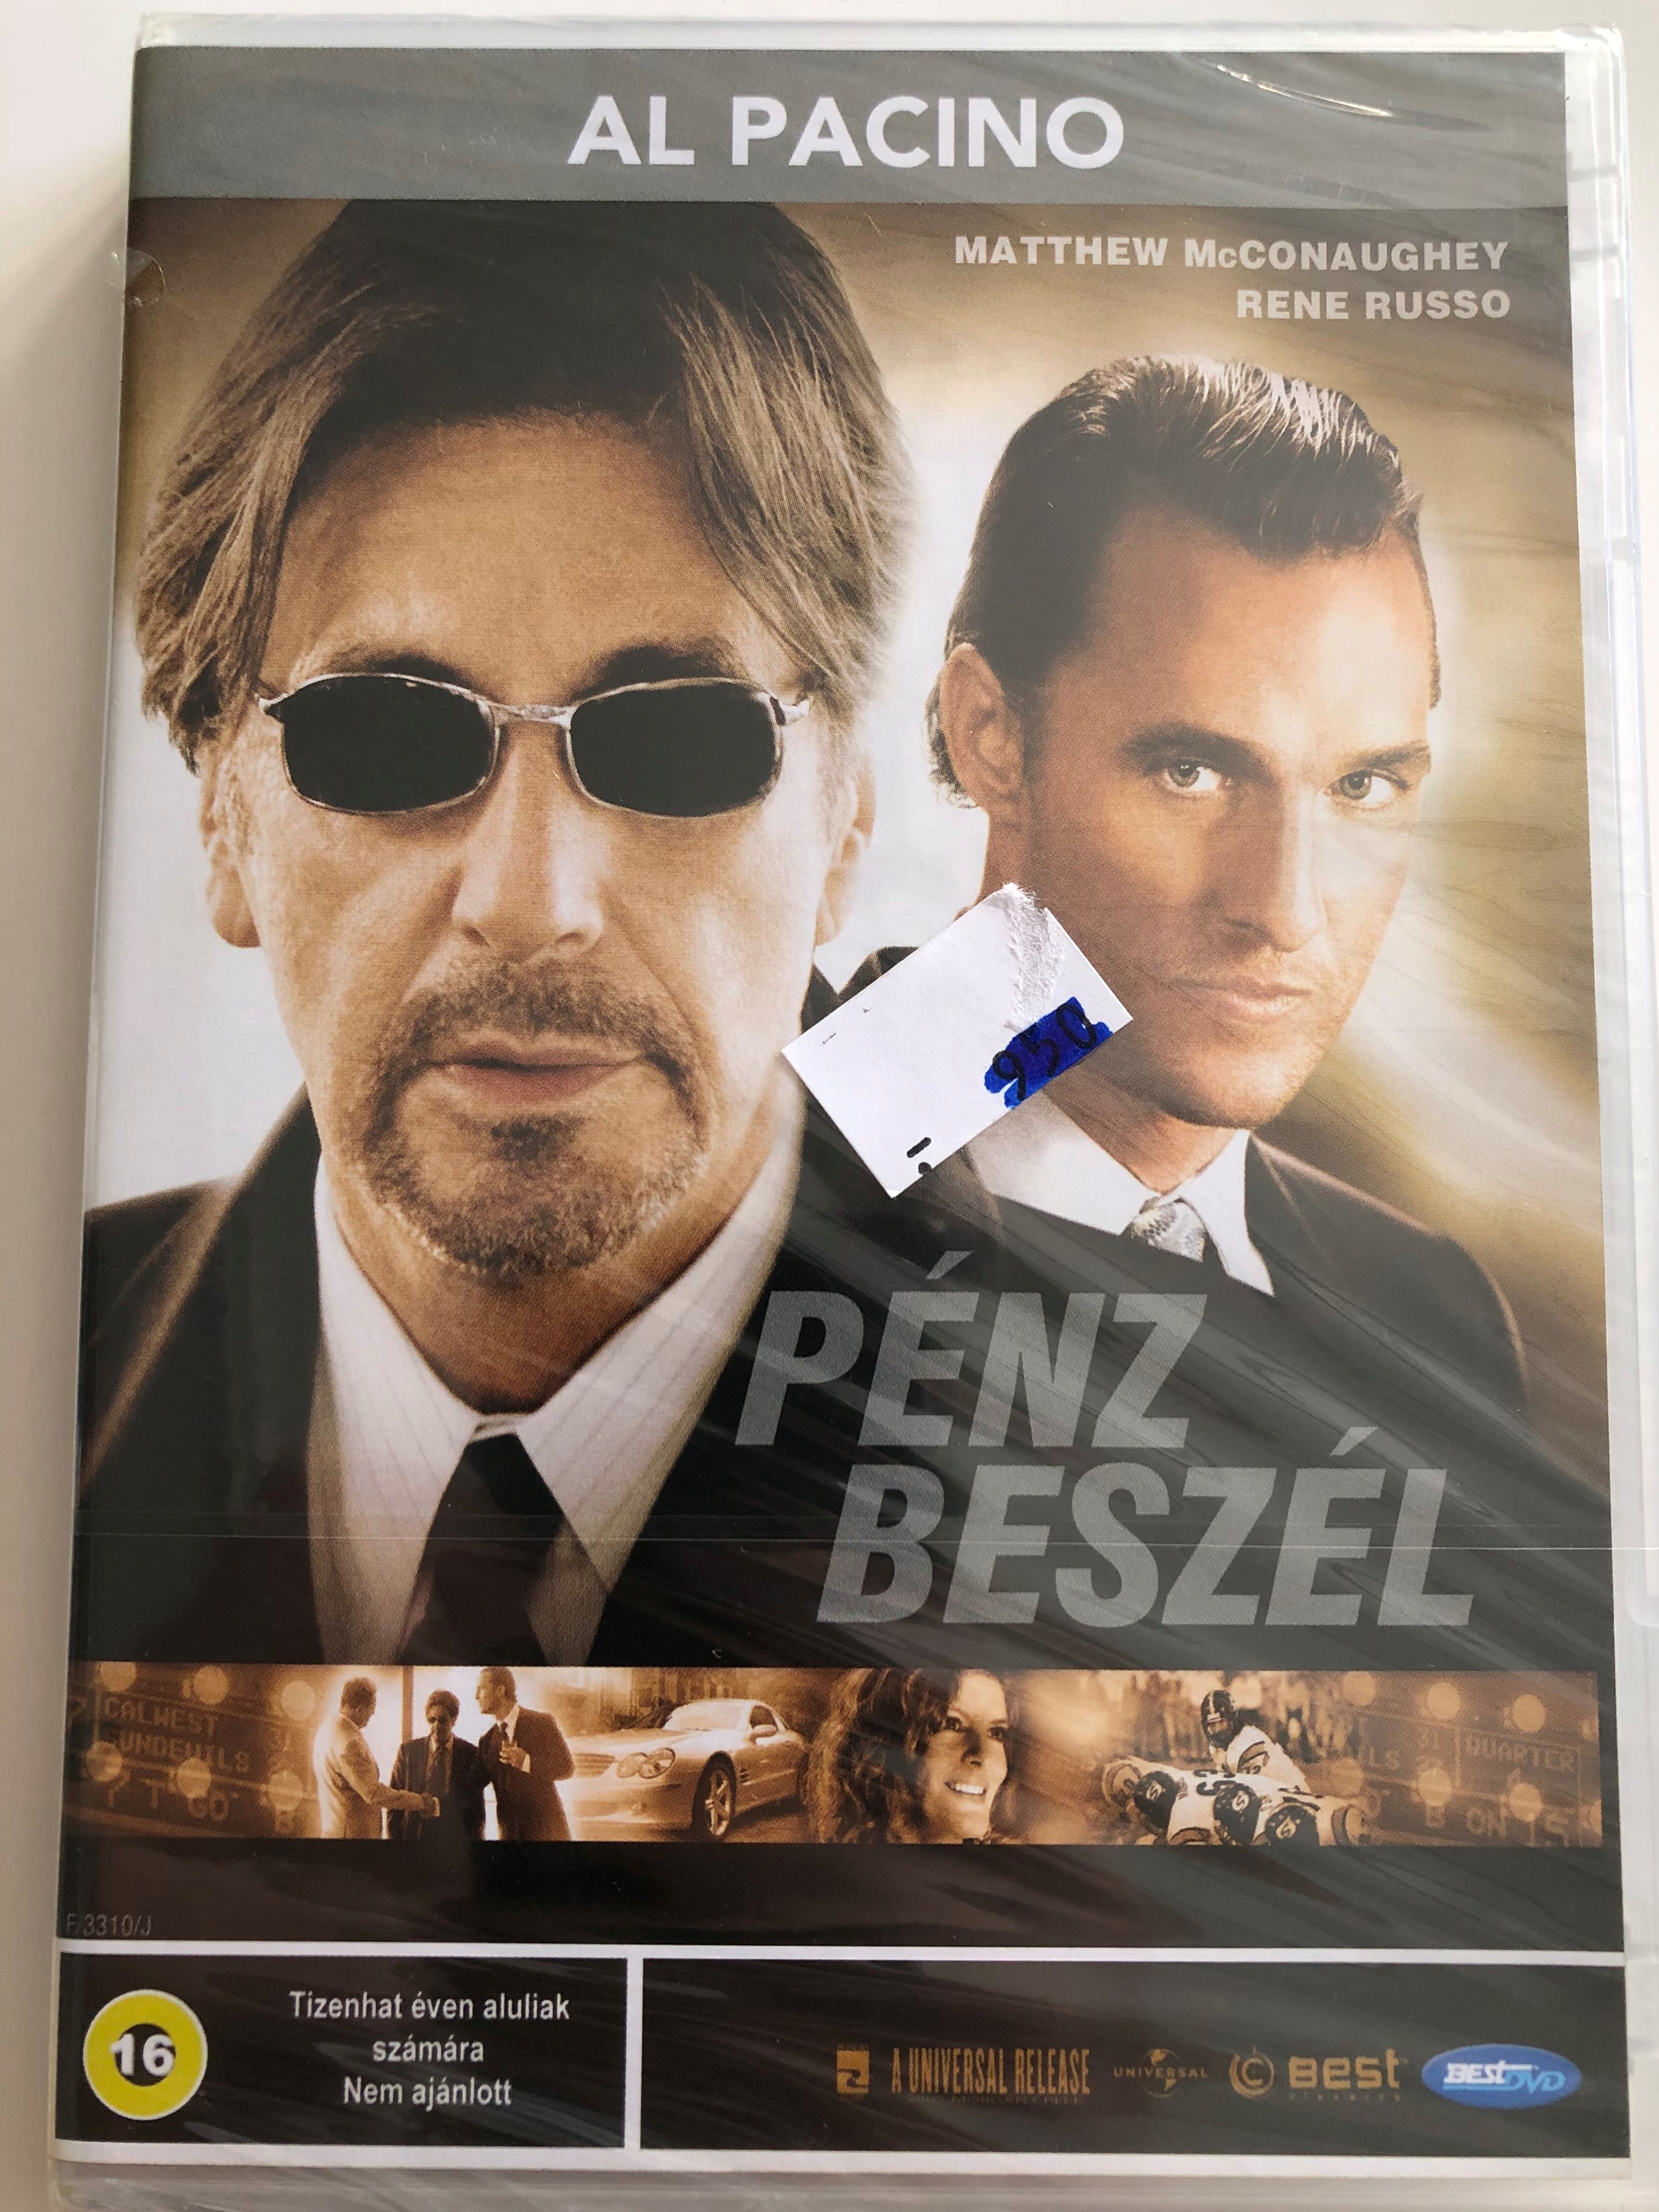 Two for the Money DVD 2005 Pénz beszél / Directed by D. J. Caruso /  Starring: Al Pacino, Matthew McConaughey, Rene Russo - bibleinmylanguage